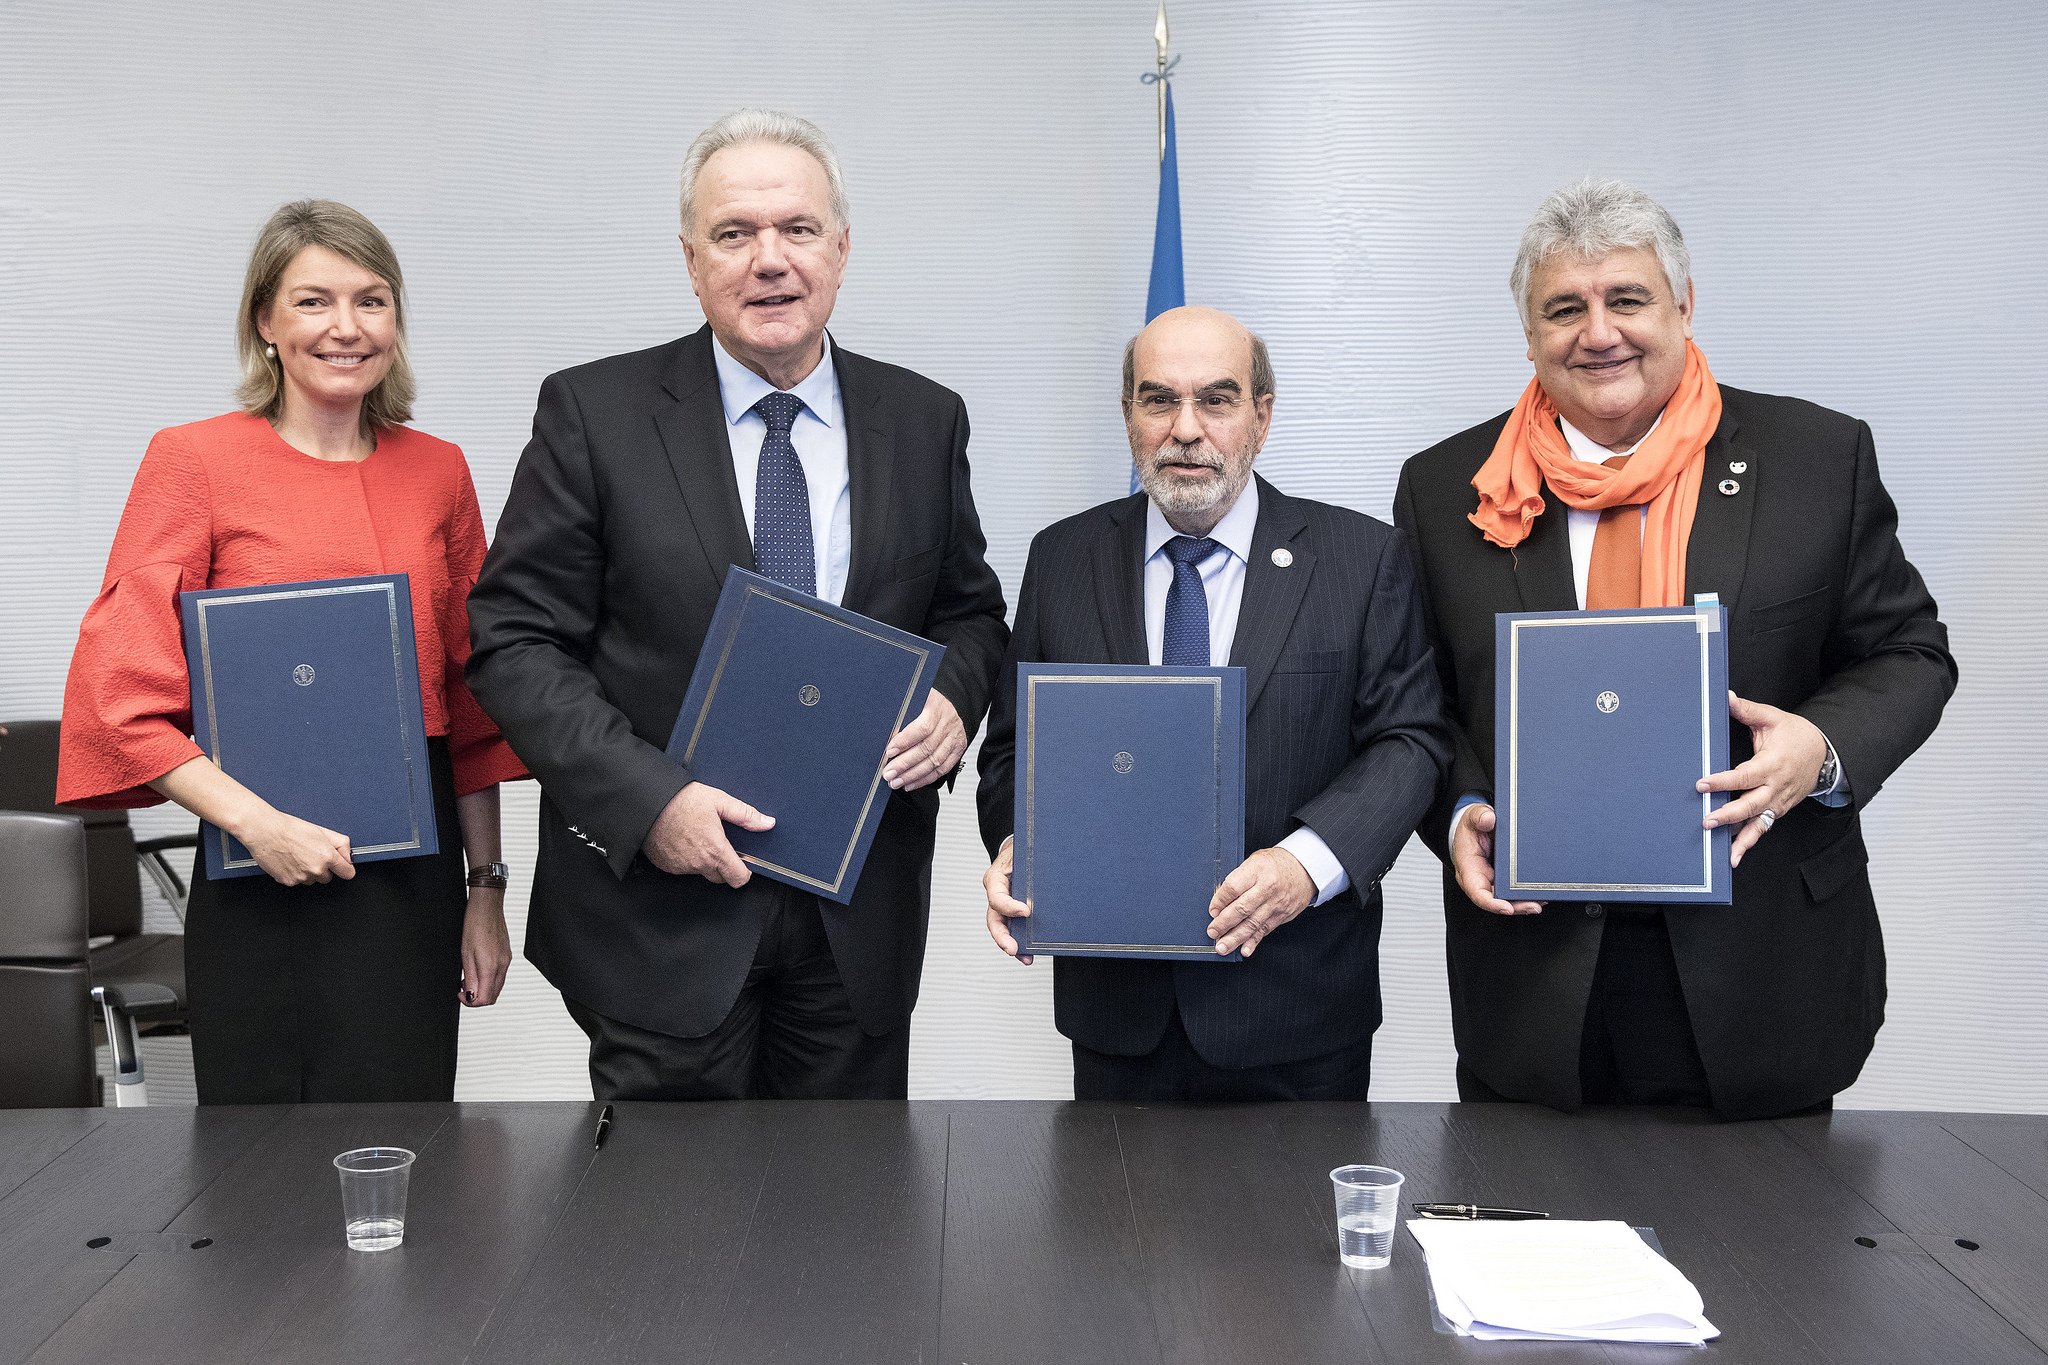 European Union provides funds in support of global food security